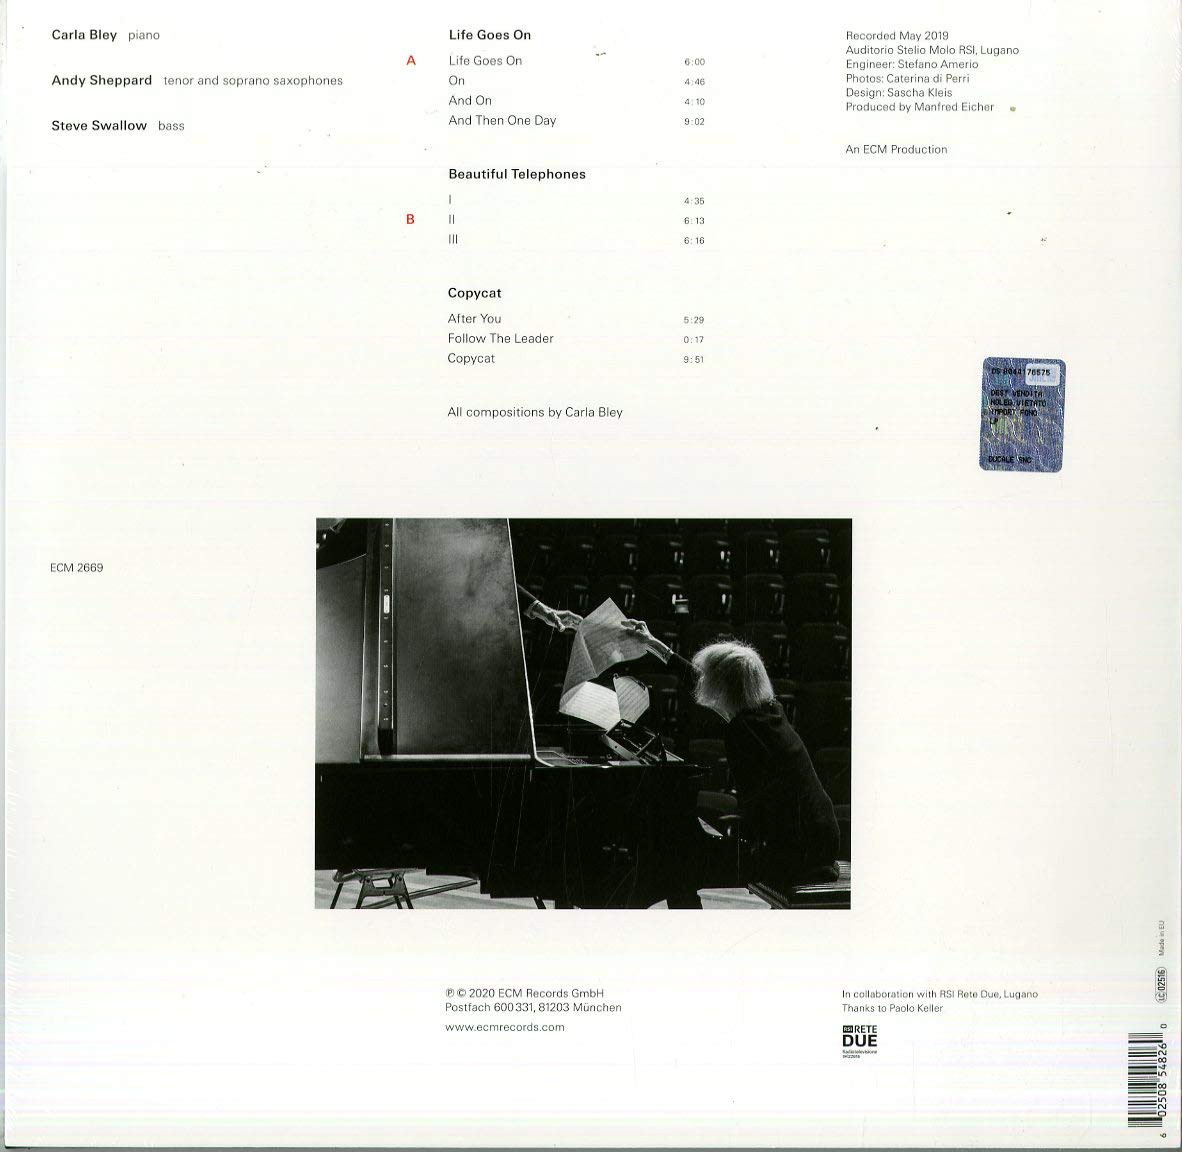 CARLA BLEY – ANDY SHEPPARD – STEVE SWALLOW – LIFE GOES ON ARKA